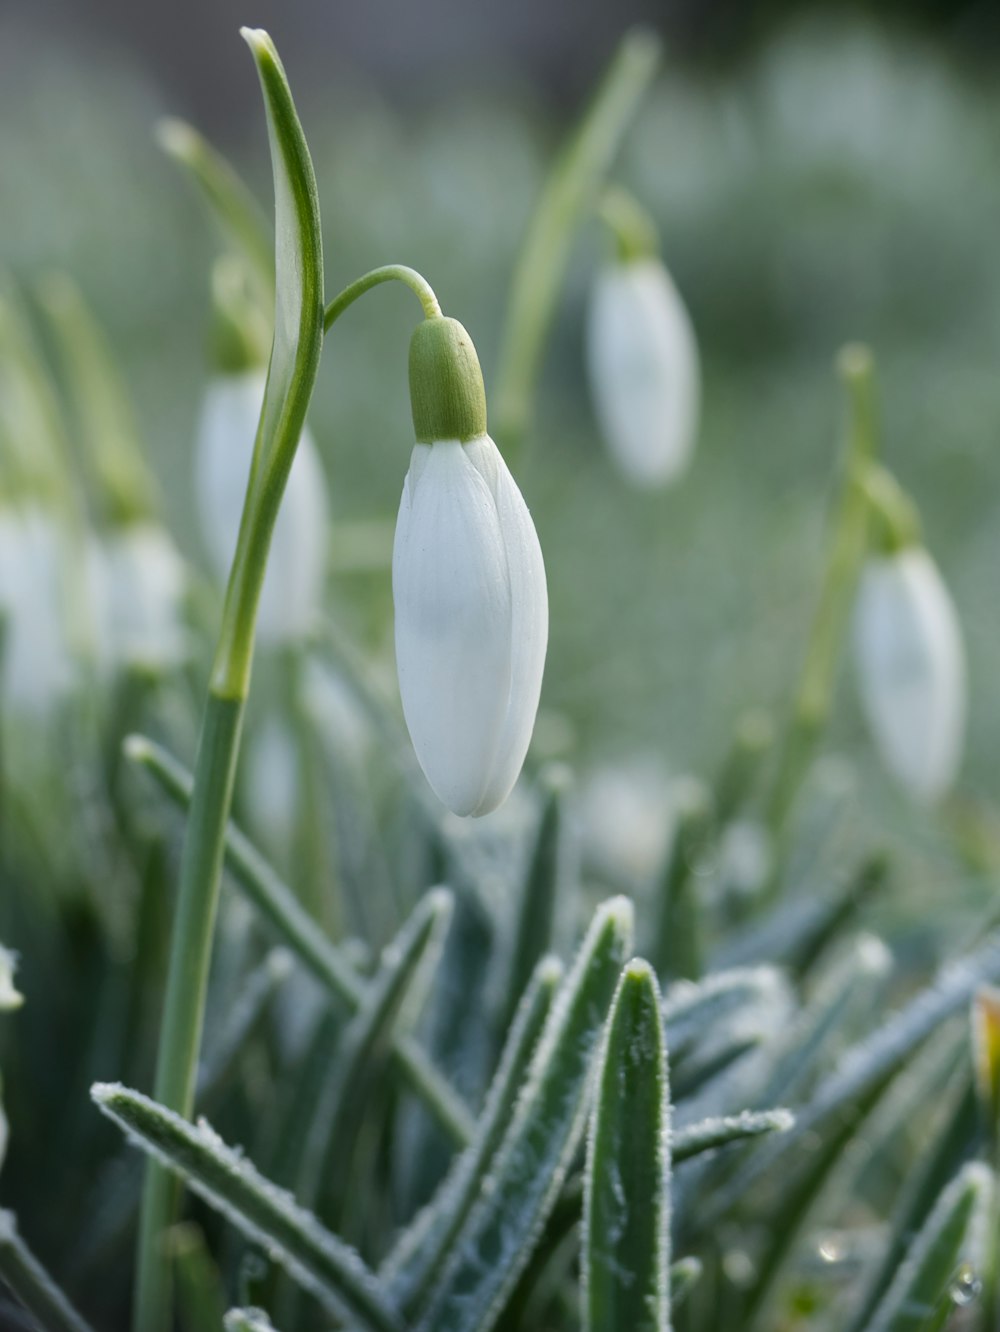 a close up of a snowdrop flower on a plant